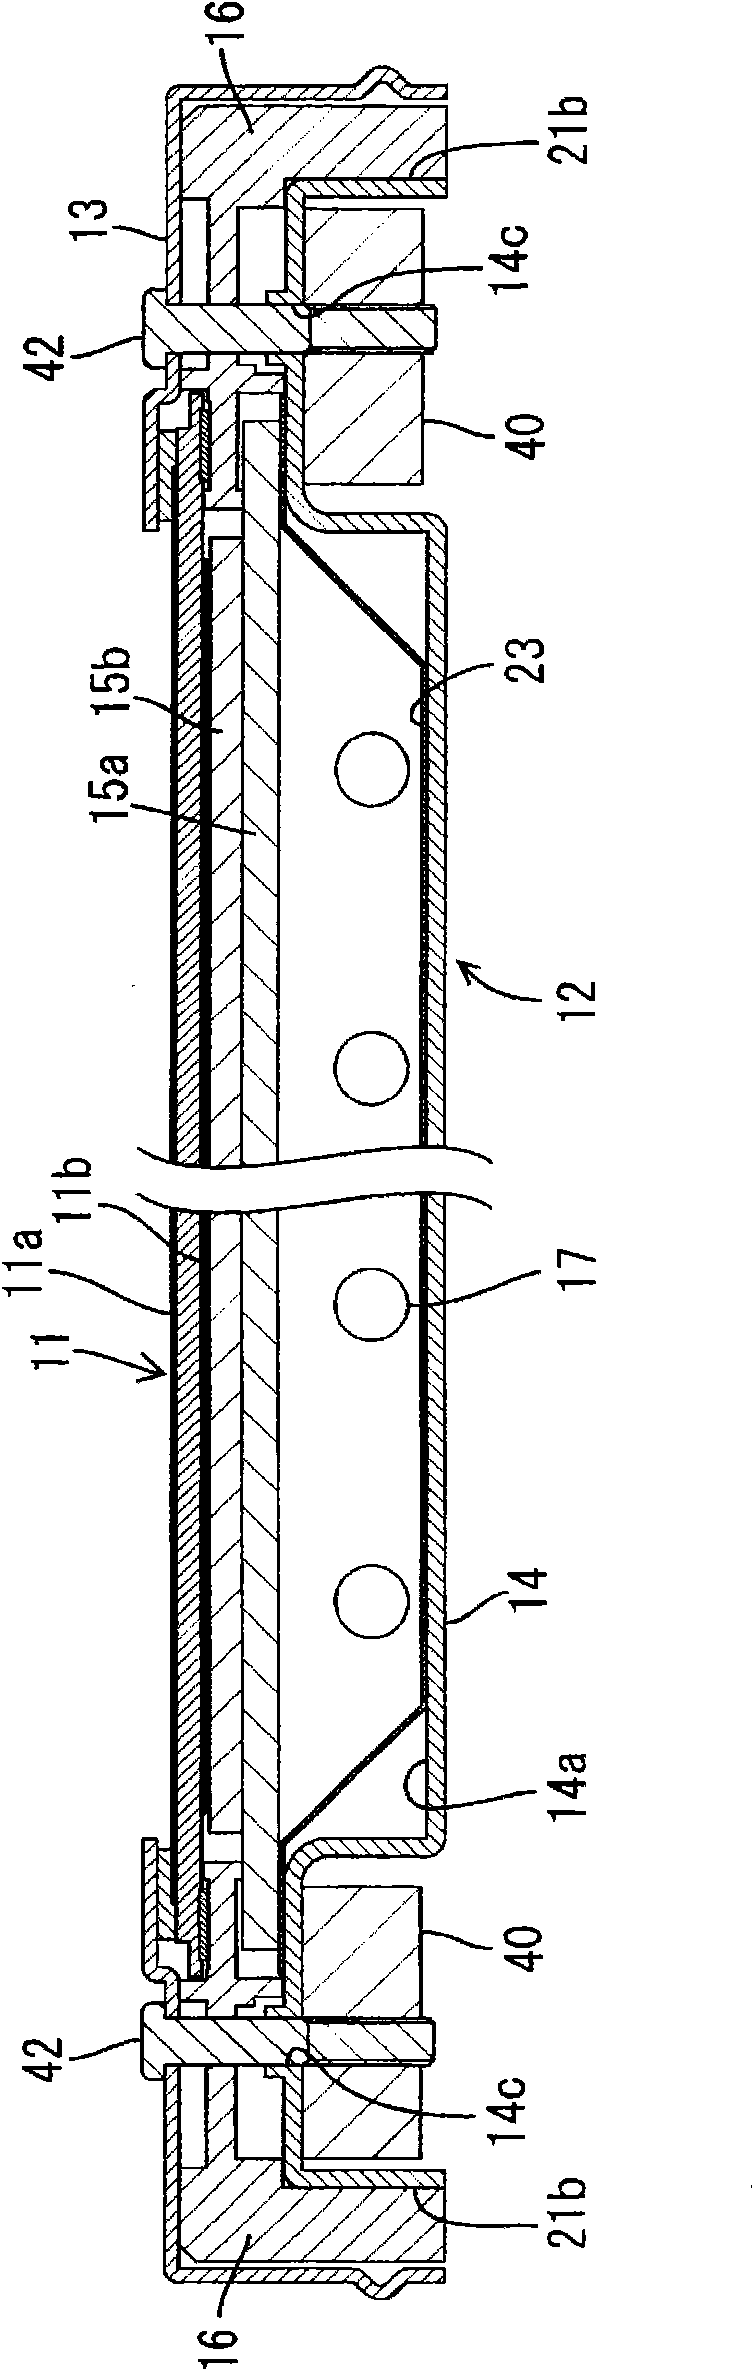 Illumination device, display device, and television receiving device